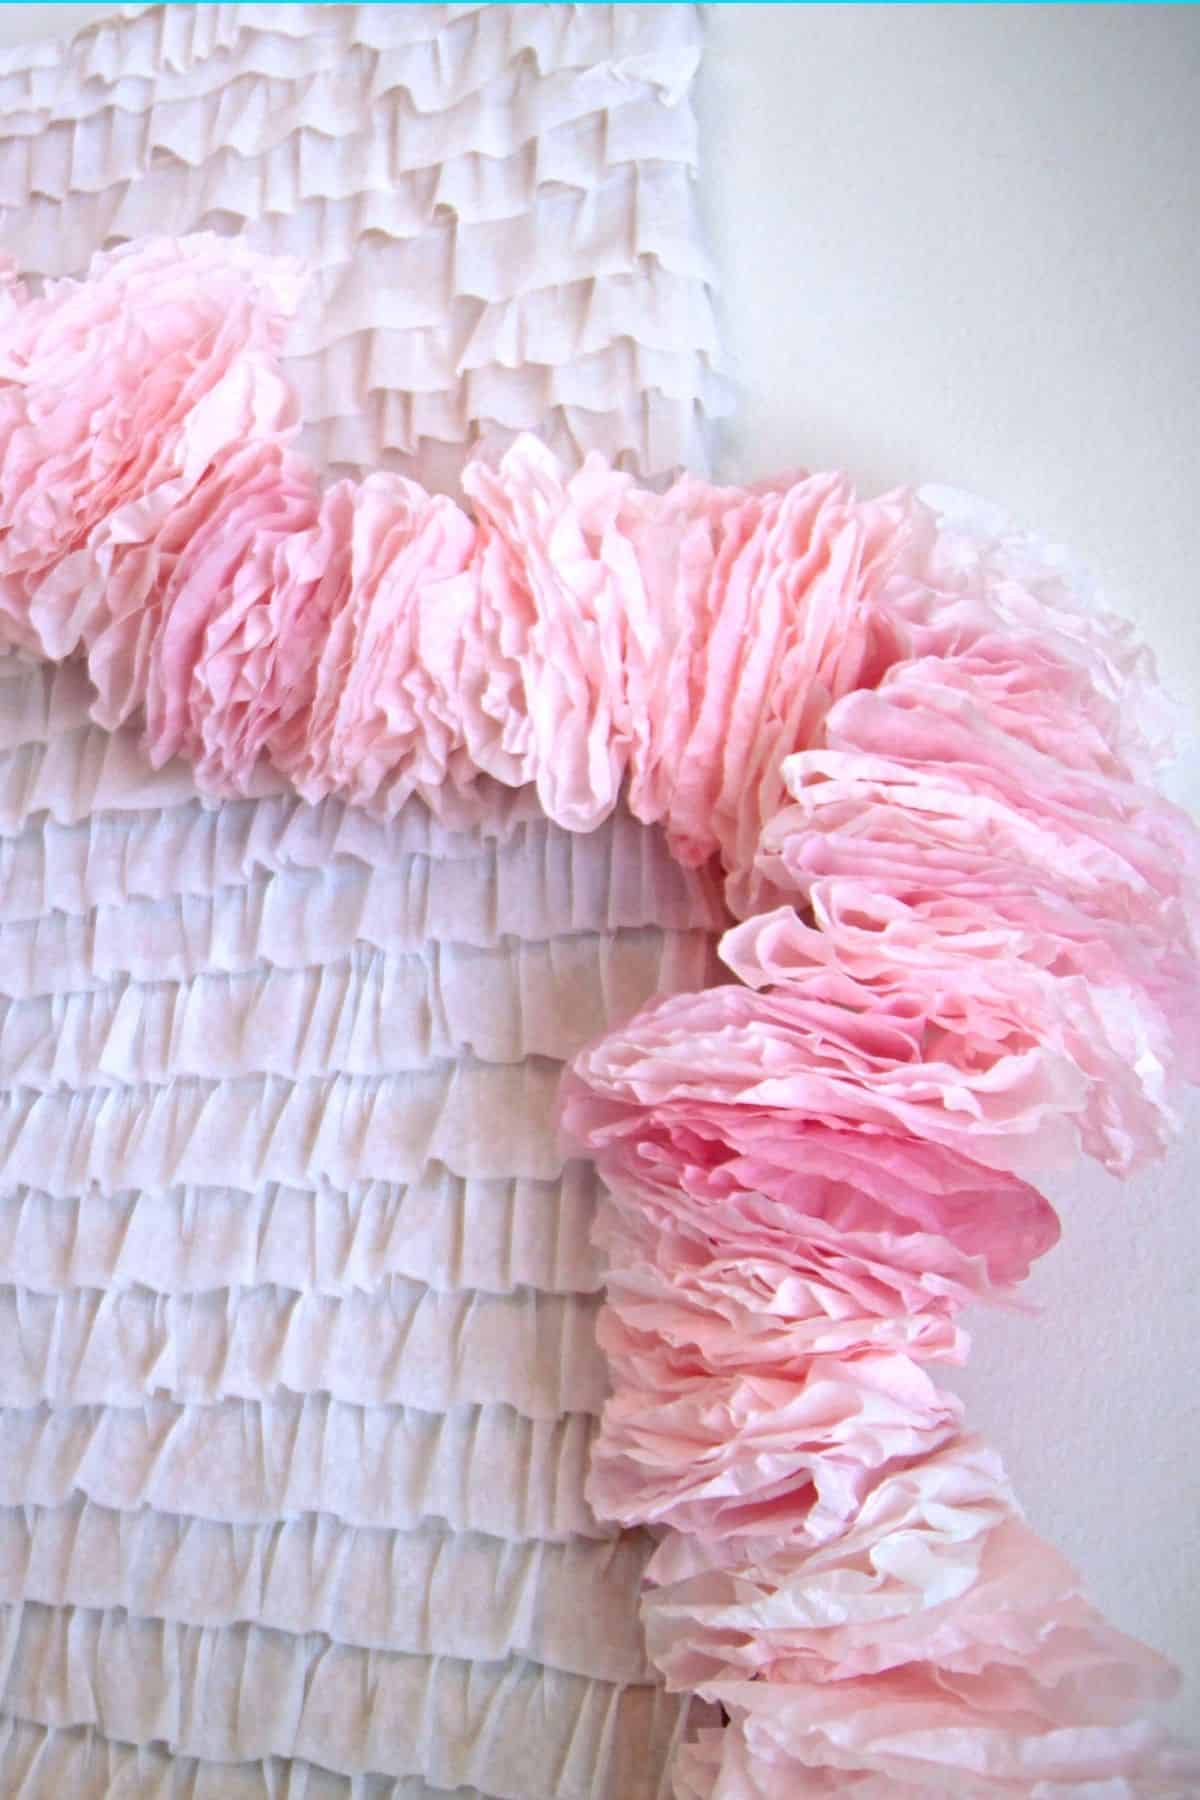 A ruffly pink garland made out of coffee filters.